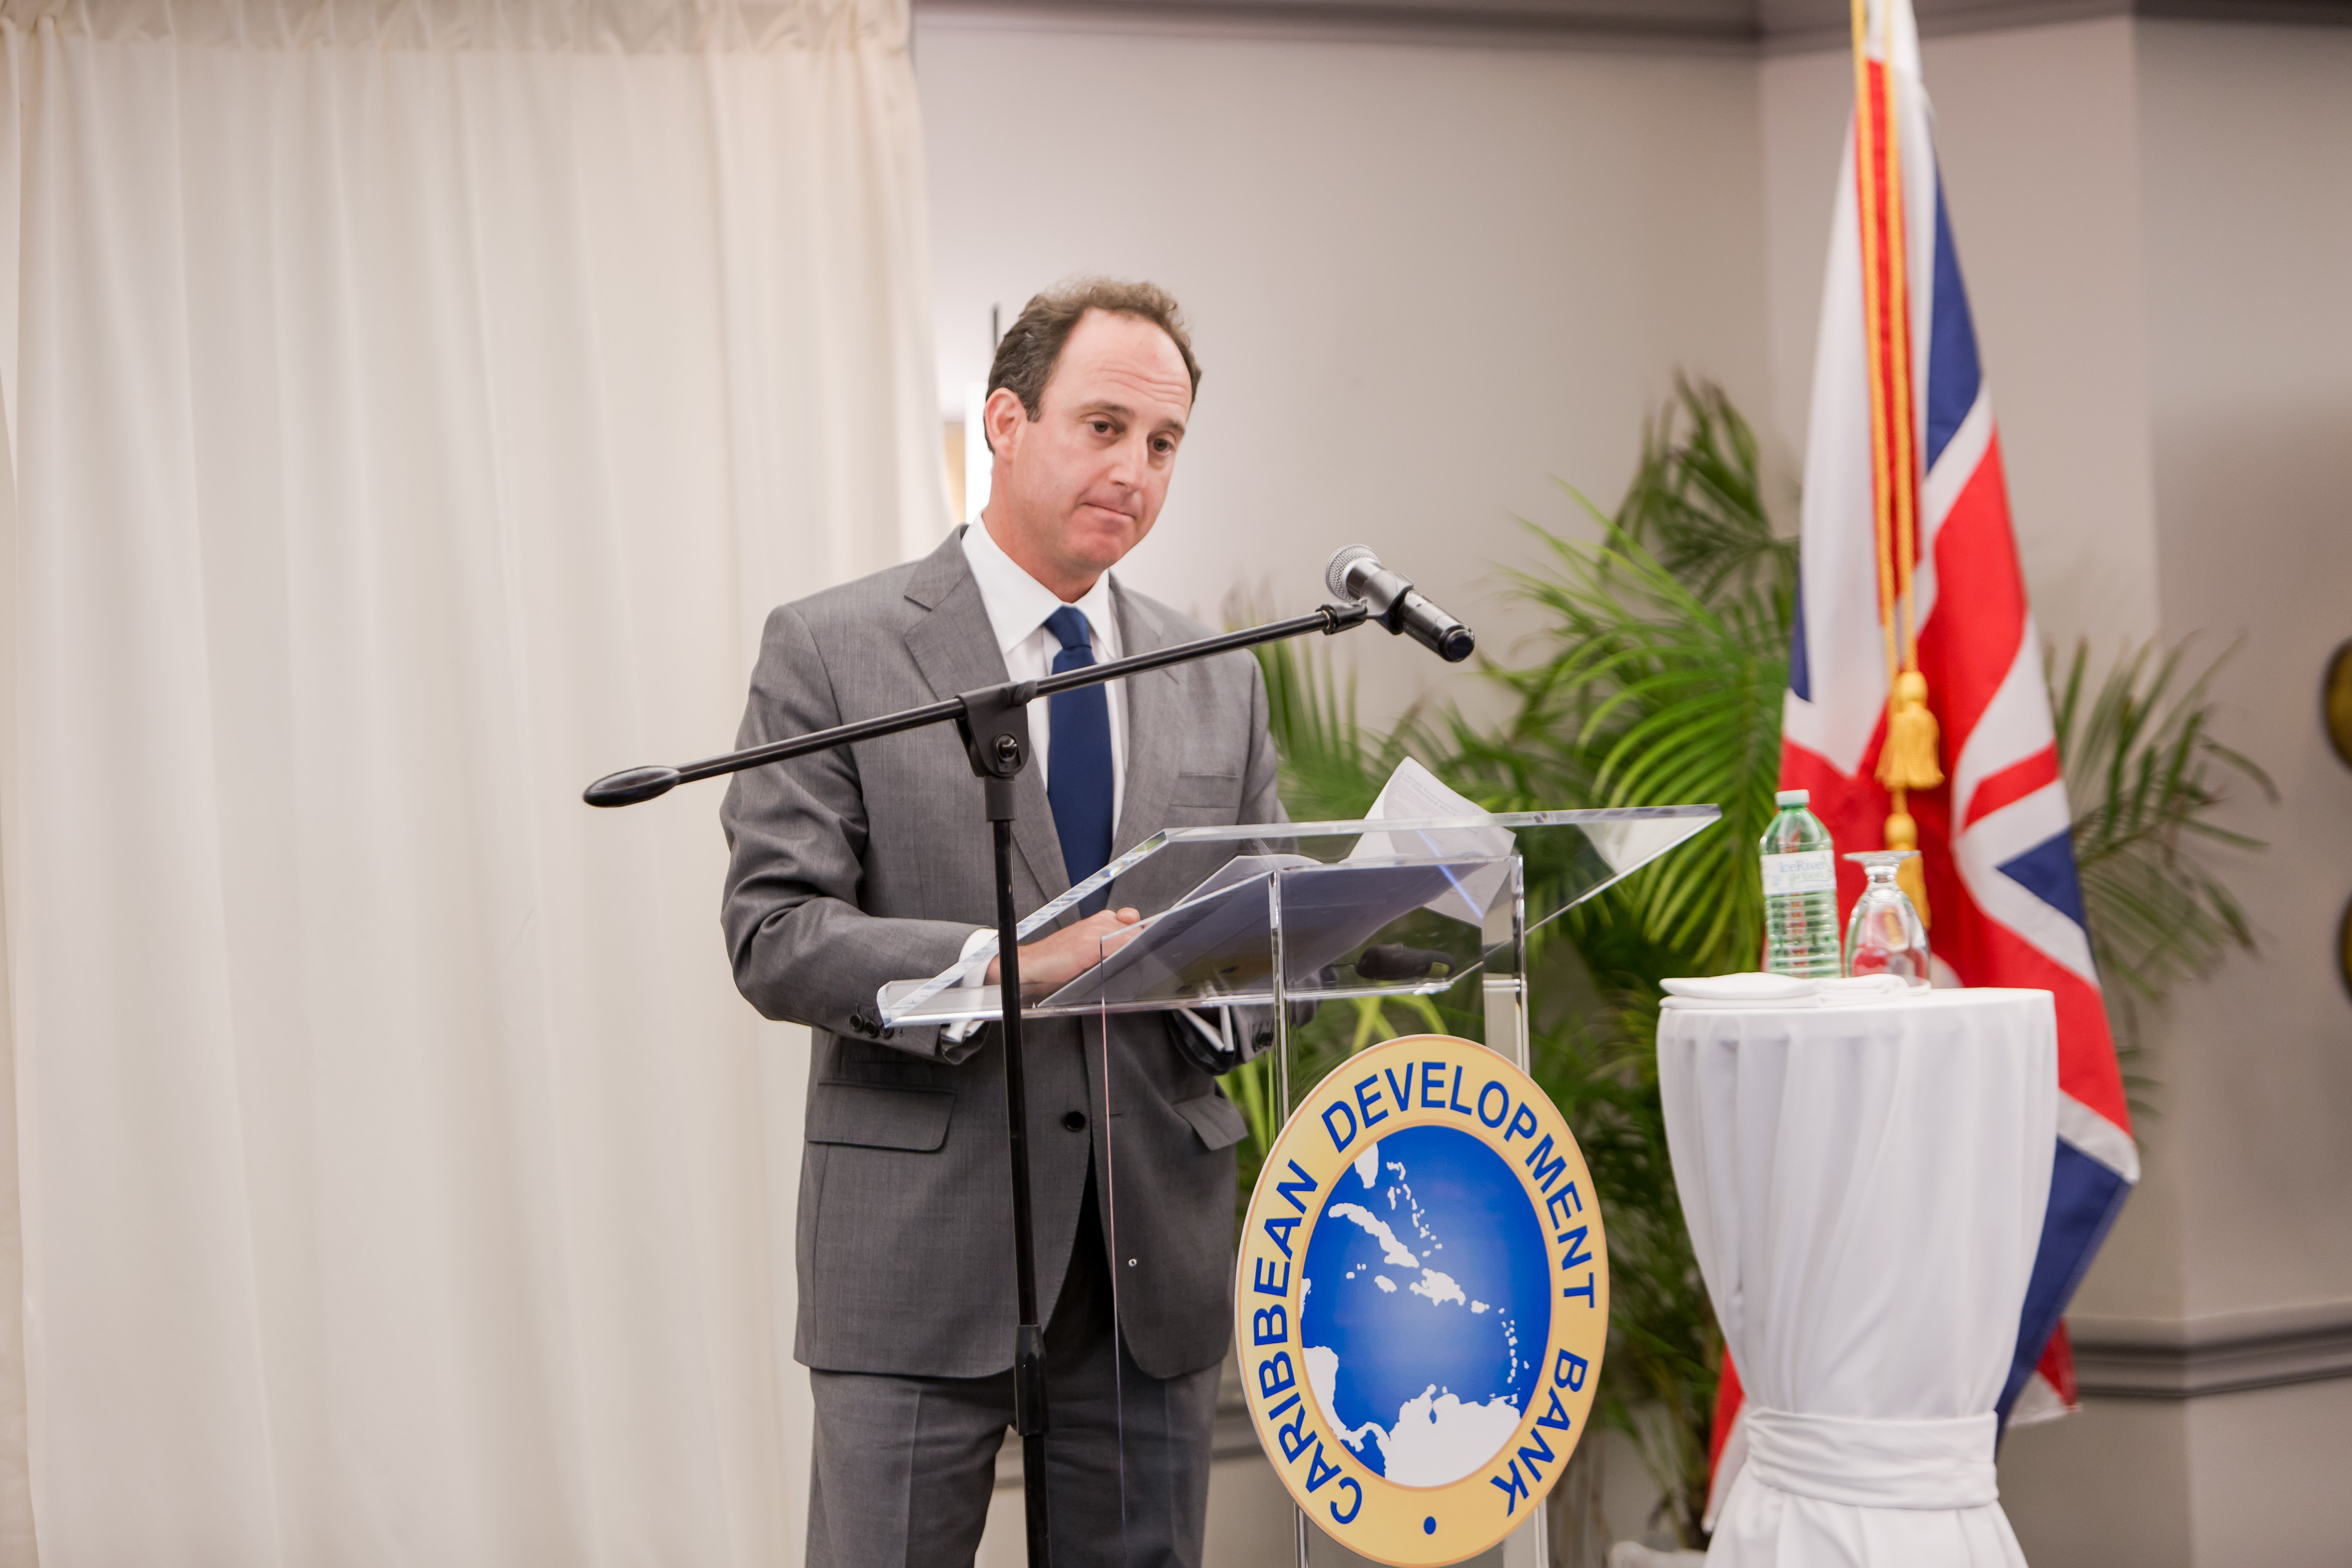 Dr. Daniel Lederman, Deputy Chief Economist for Latin America and the Caribbean at the World Bank delivers the 18th William G. Demas Memorial Lecture in Providenciales, Turks and Caicos Islands on May 23, 2017, ahead of the Caribbean Development Bank’s Annual Meeting.